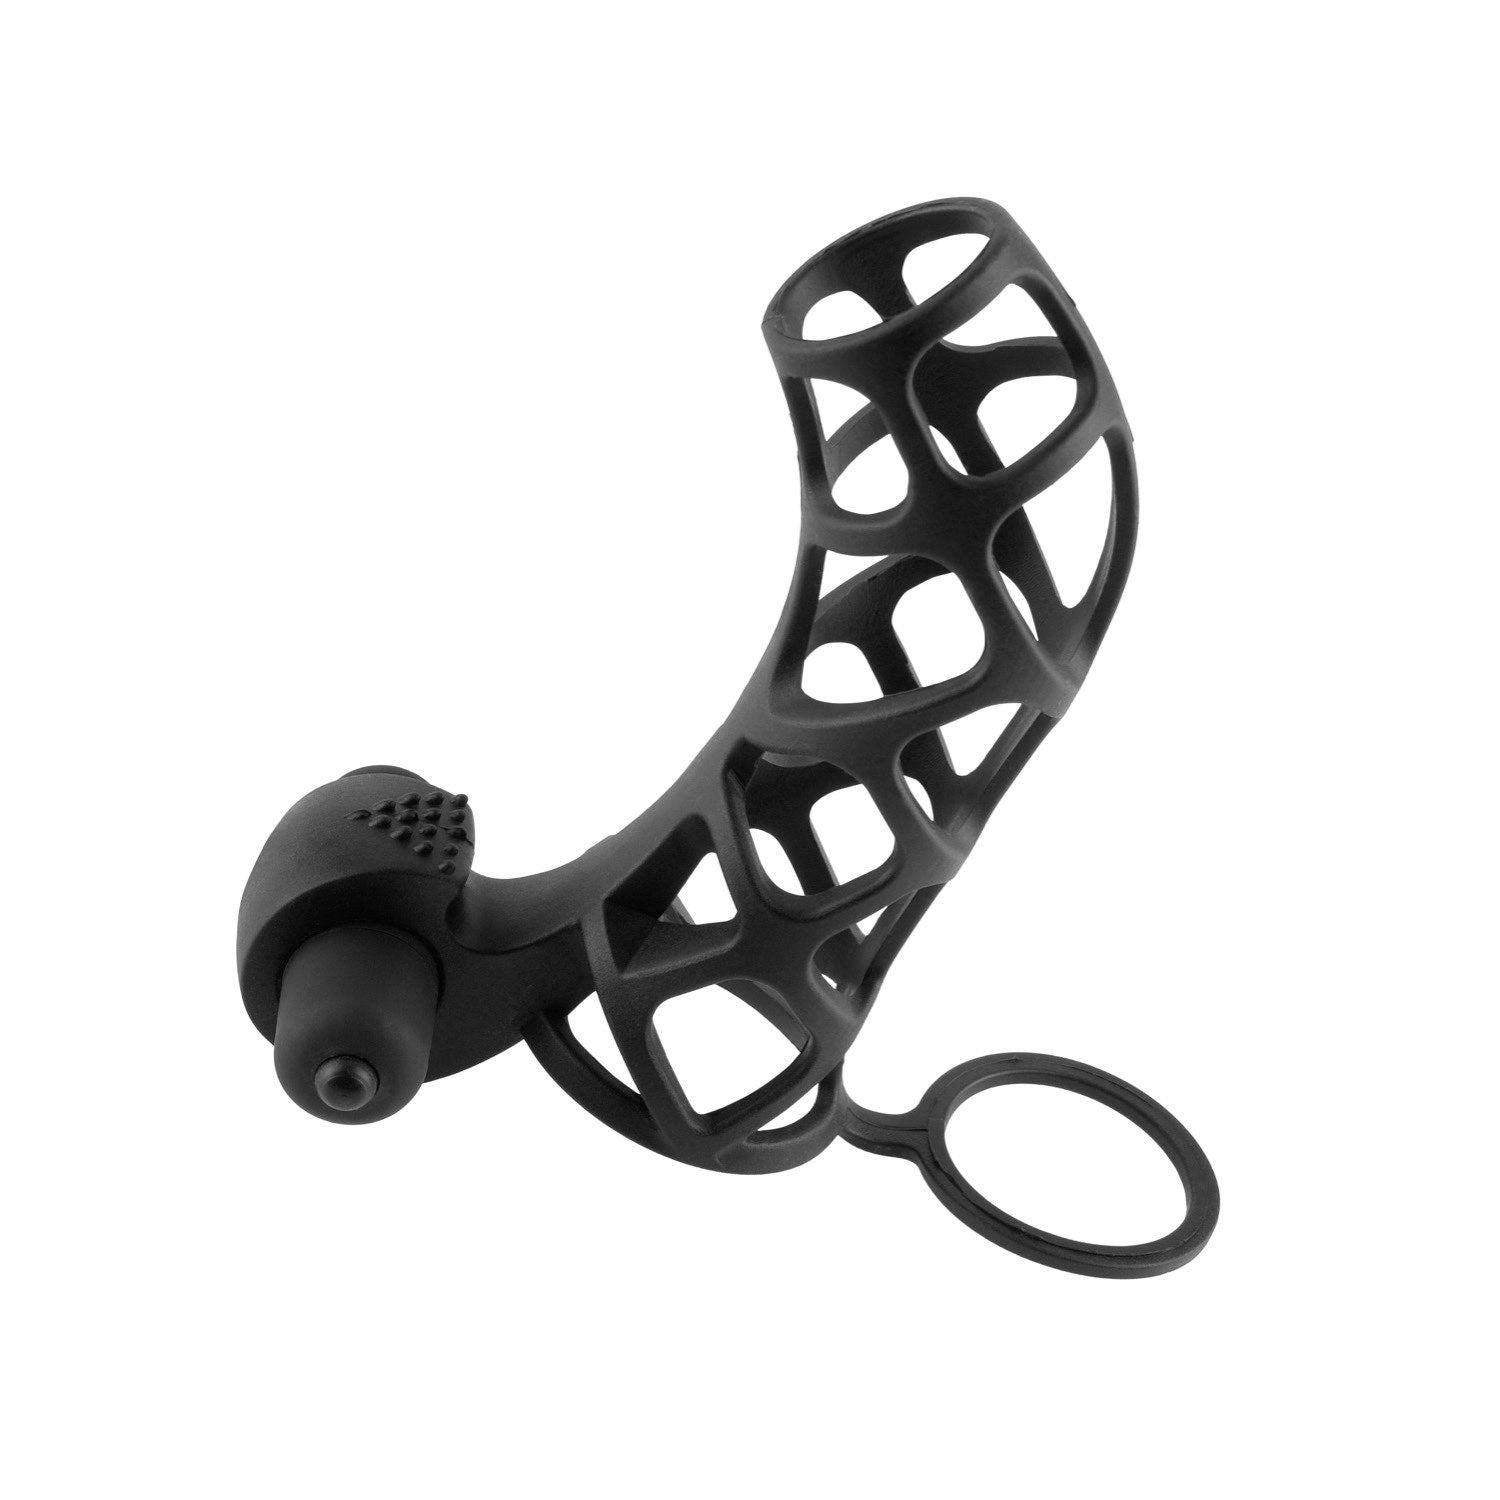 Fantasy X-Tensions Extreme Silicone Power Cage - Black Penis Sleeve with Ball Strap &amp; Vibrating Clit Stimulator by Pipedream